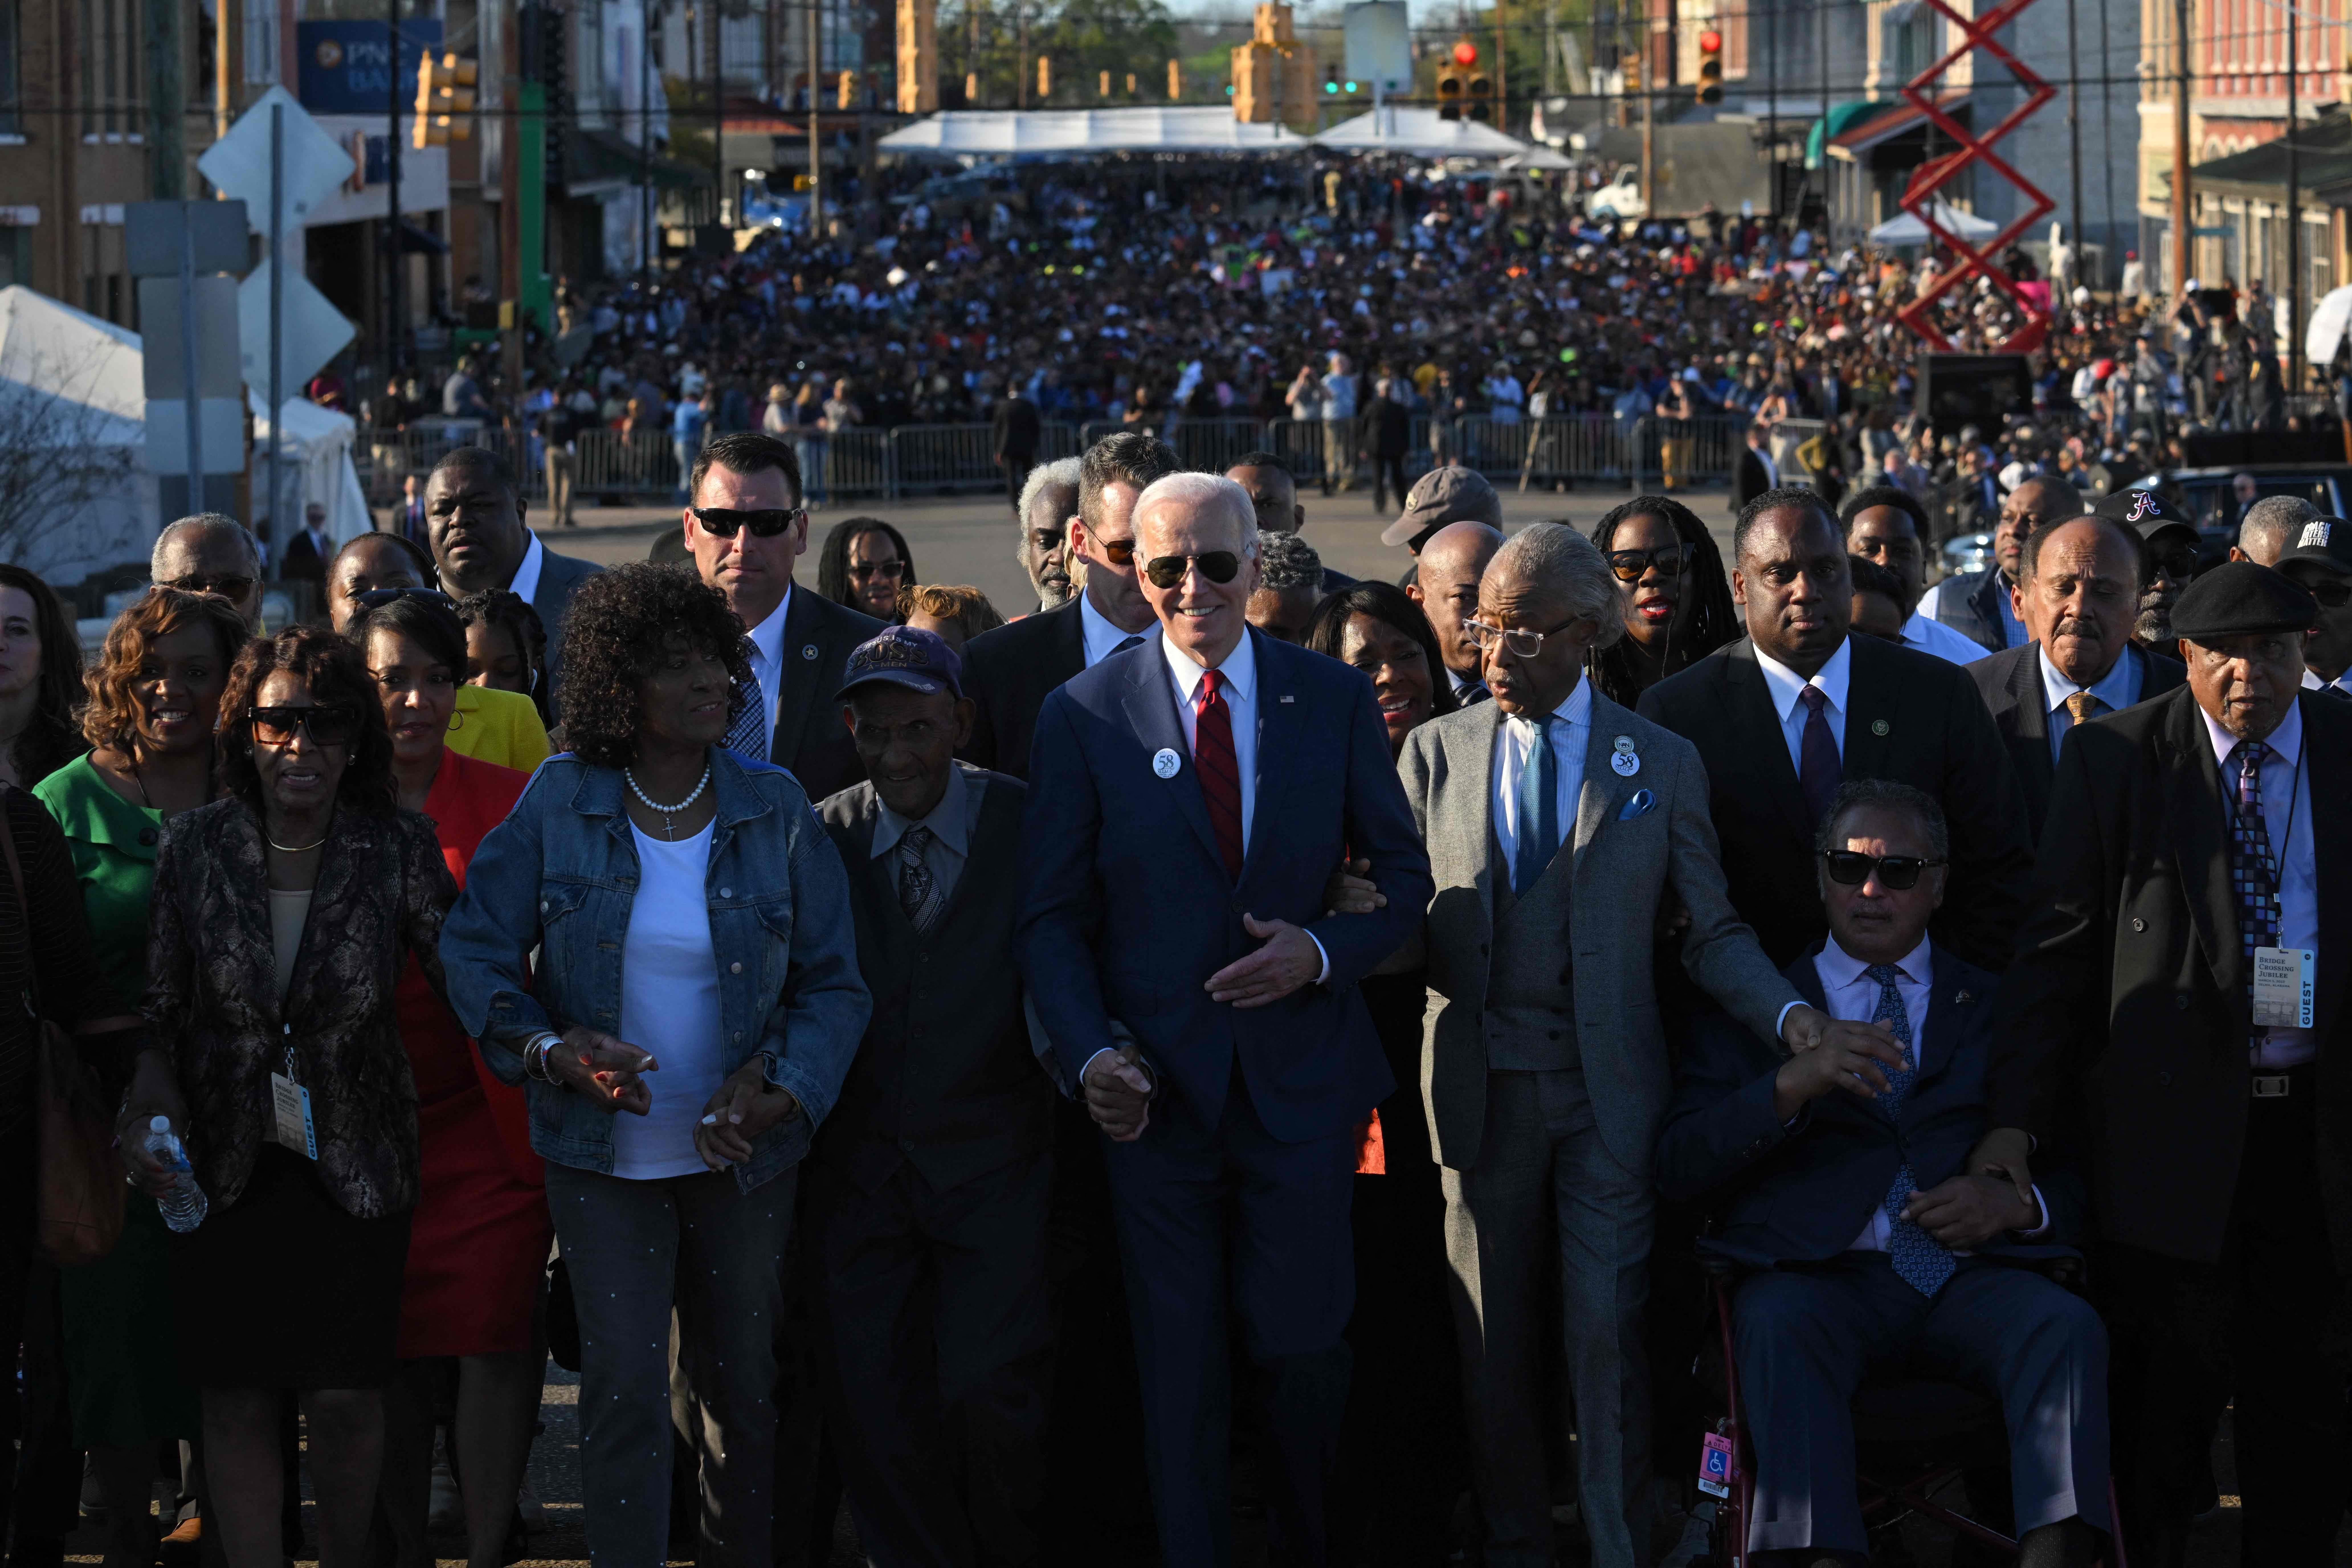 Biden surrounded by people as he crosses a bridge.